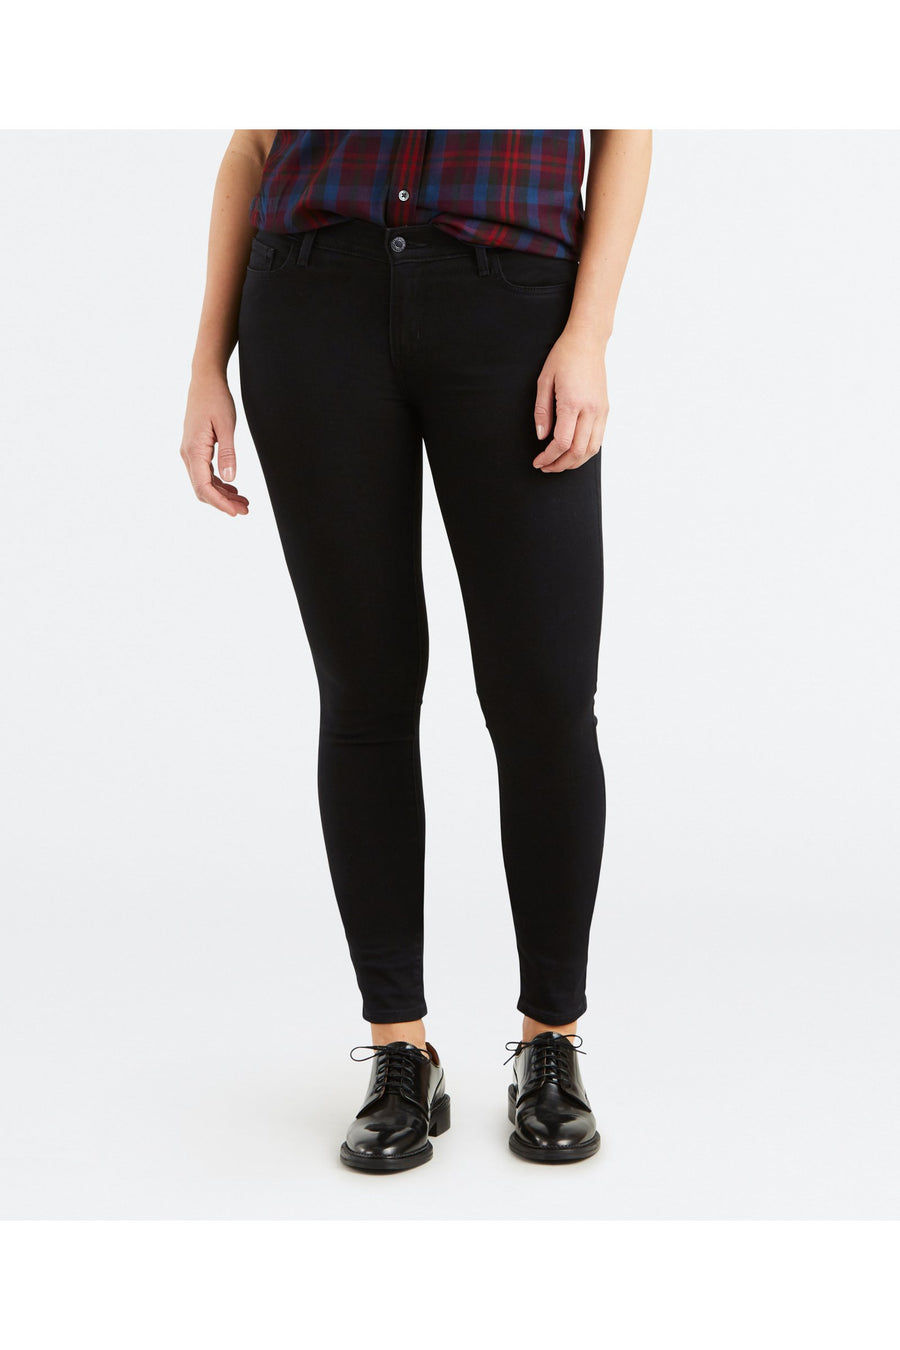 LEVIS JEANS - 710 SUPER SKINNY SECLUDED ECHO